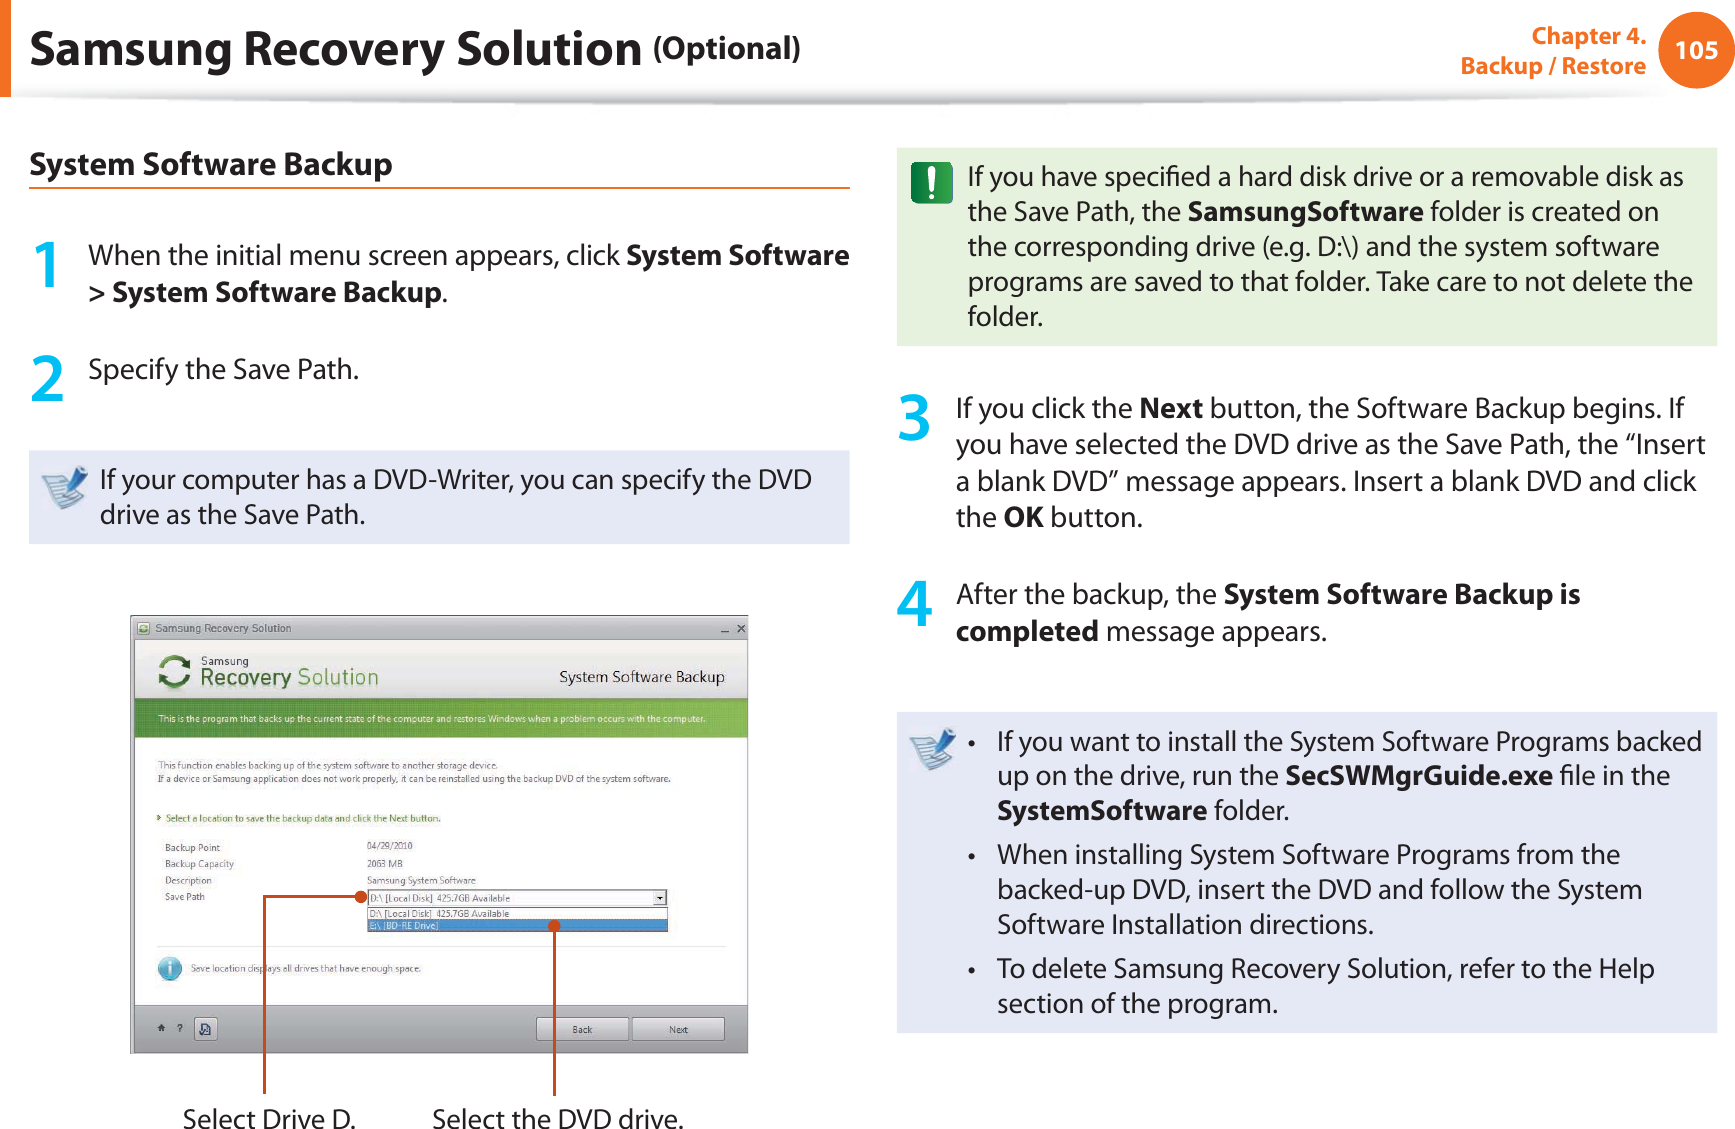 105Chapter 4.  Backup / RestoreSamsung Recovery Solution (Optional)System Software Backup1  When the initial menu screen appears, click System Software &gt; System Software Backup.2  Specify the Save Path. If your computer has a DVD-Writer, you can specify the DVD drive as the Save Path.Select Drive D. Select the DVD drive.If you have speci ed a hard disk drive or a removable disk as the Save Path, the SamsungSoftware folder is created on the corresponding drive (e.g. D:\) and the system software programs are saved to that folder. Take care to not delete the folder. 3  If you click the Next button, the Software Backup begins. If you have selected the DVD drive as the Save Path, the “Insert a blank DVD” message appears. Insert a blank DVD and click the OK button.4  After the backup, the System Software Backup is completed message appears.If you want to install the System Software Programs backed t up on the drive, run the SecSWMgrGuide.exe  le in the SystemSoftware folder.When installing System Software Programs from the t backed-up DVD, insert the DVD and follow the System Software Installation directions.To delete Samsung Recovery Solution, refer to the Help t section of the program.